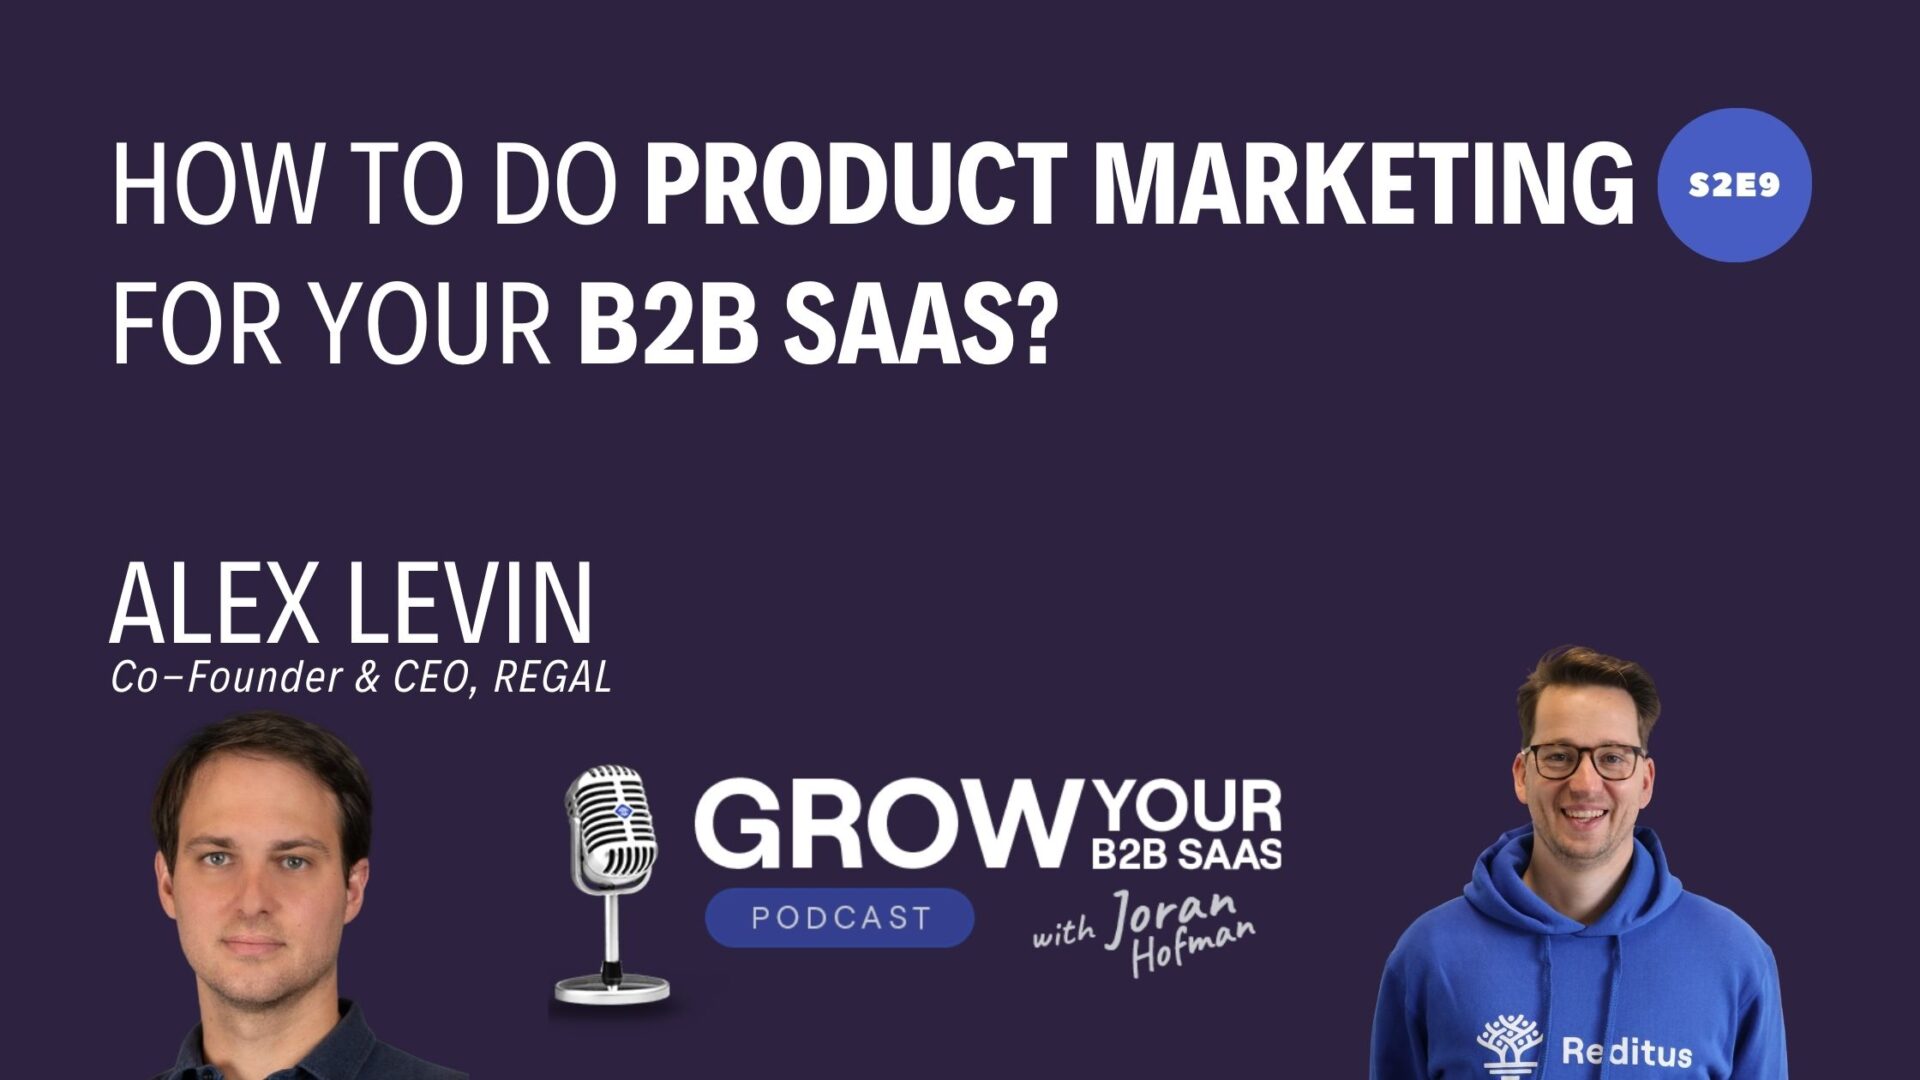 https://www.getreditus.com/podcast/s2e9-how-to-do-product-marketing-for-your-b2b-saas-with-alex-levin/